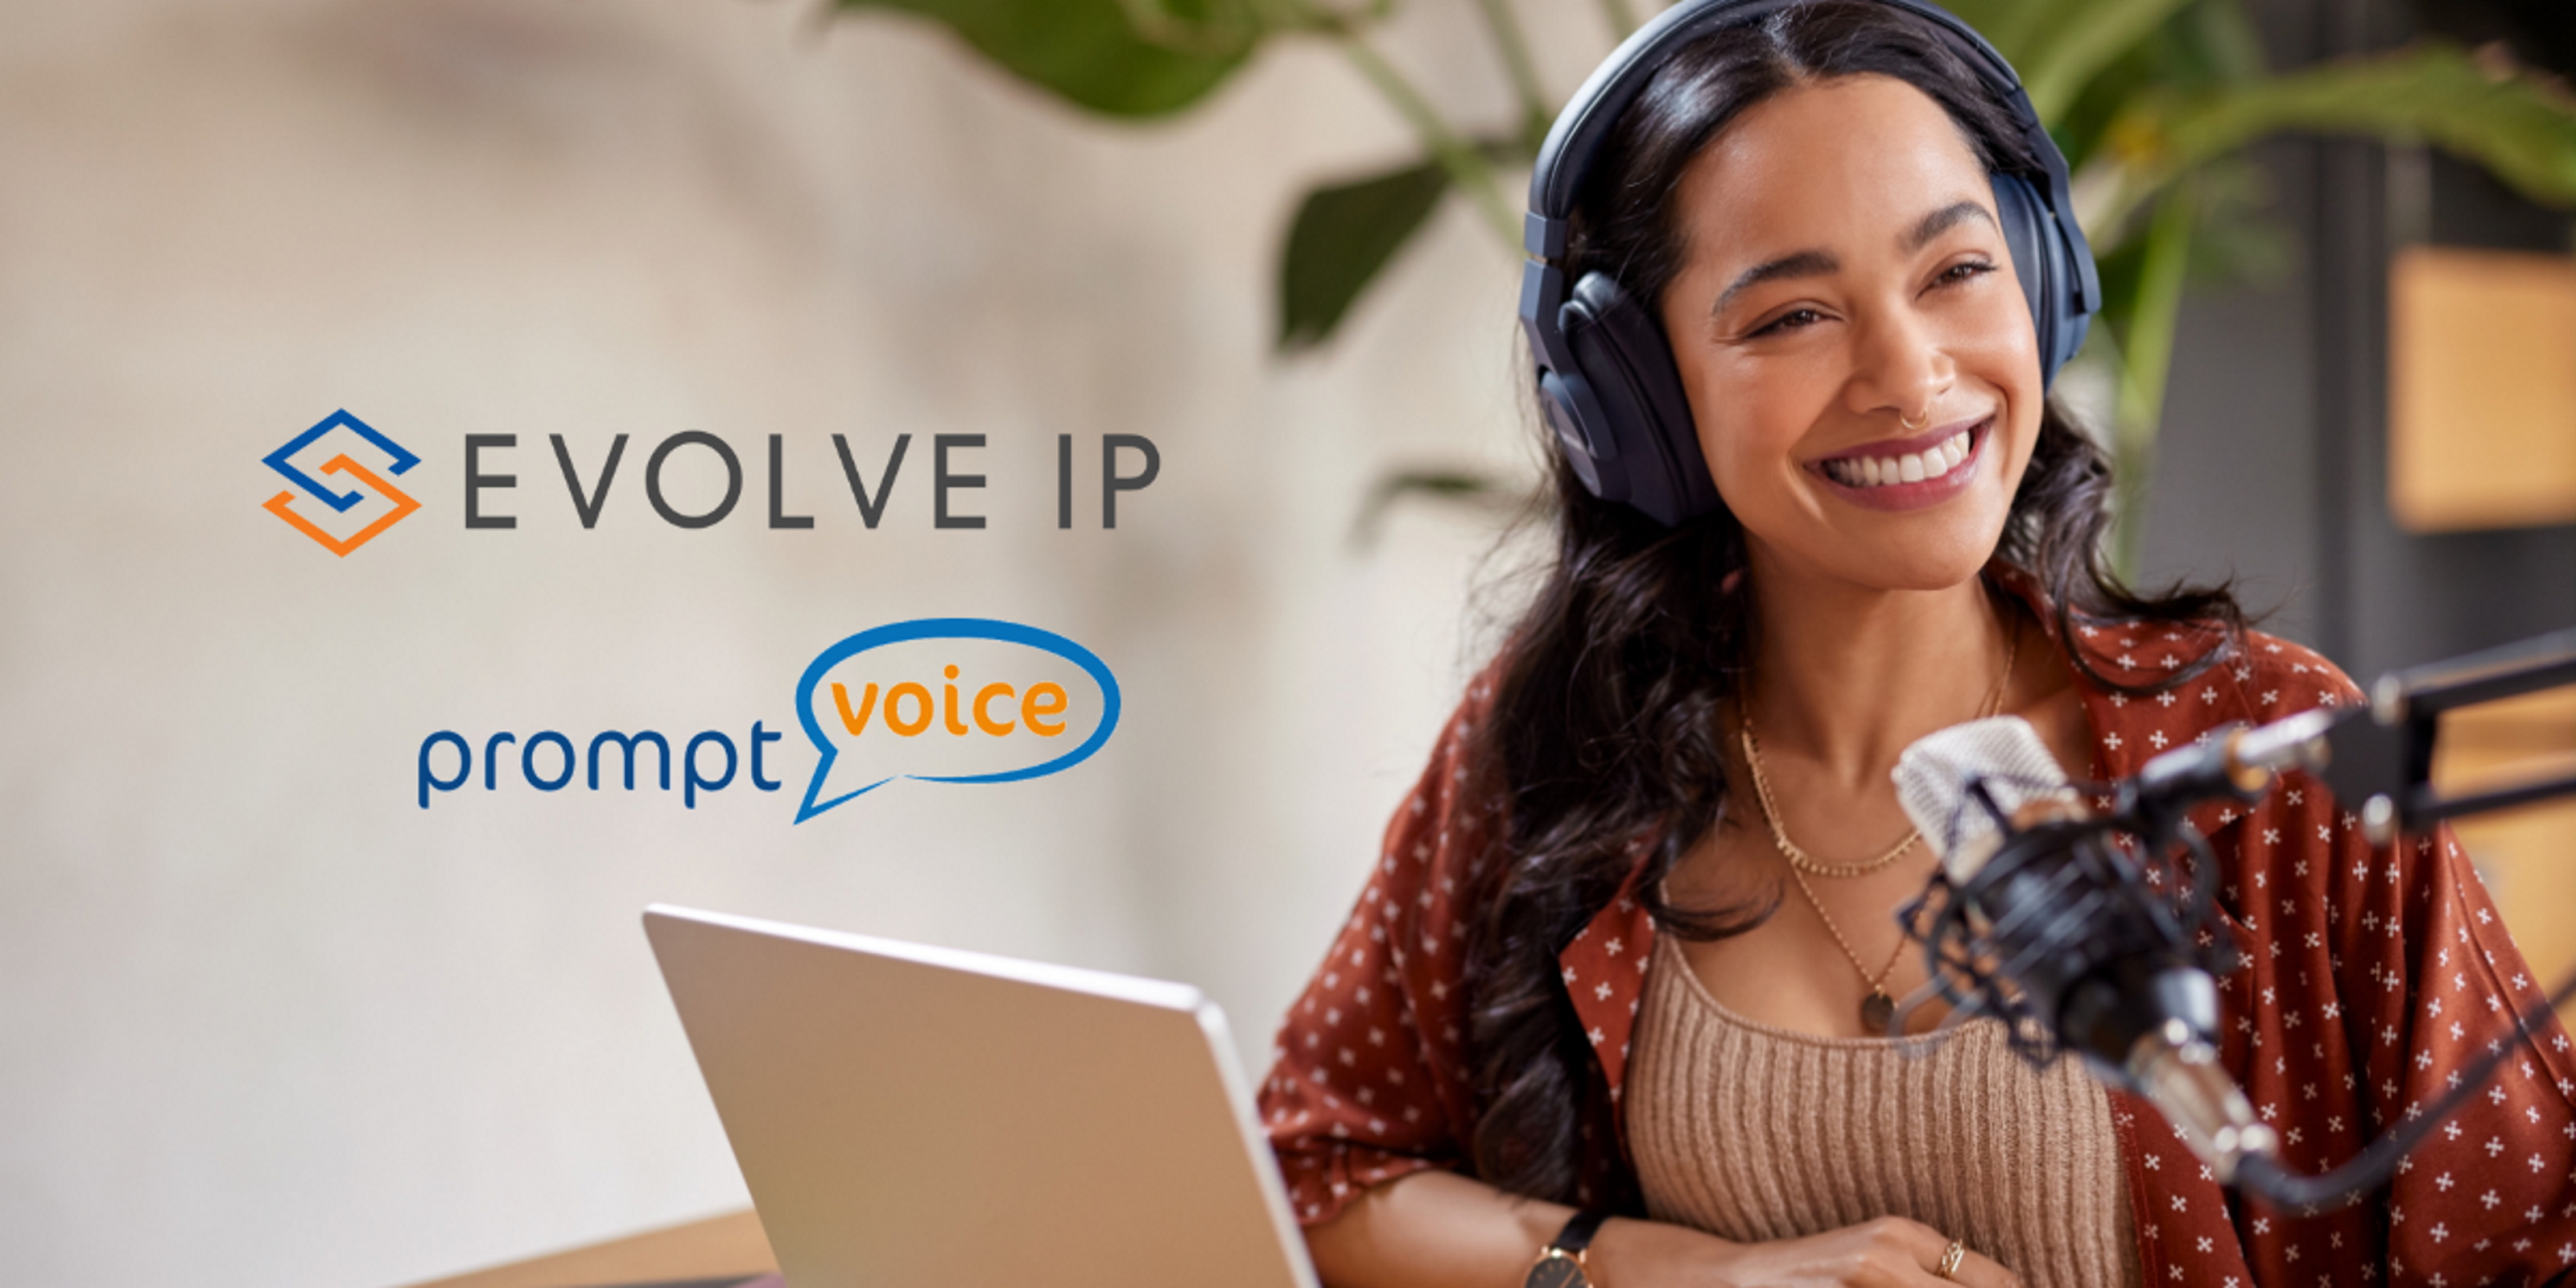 Evolve IP Develops A More Powerful AI Voice With AI Studio Innovation